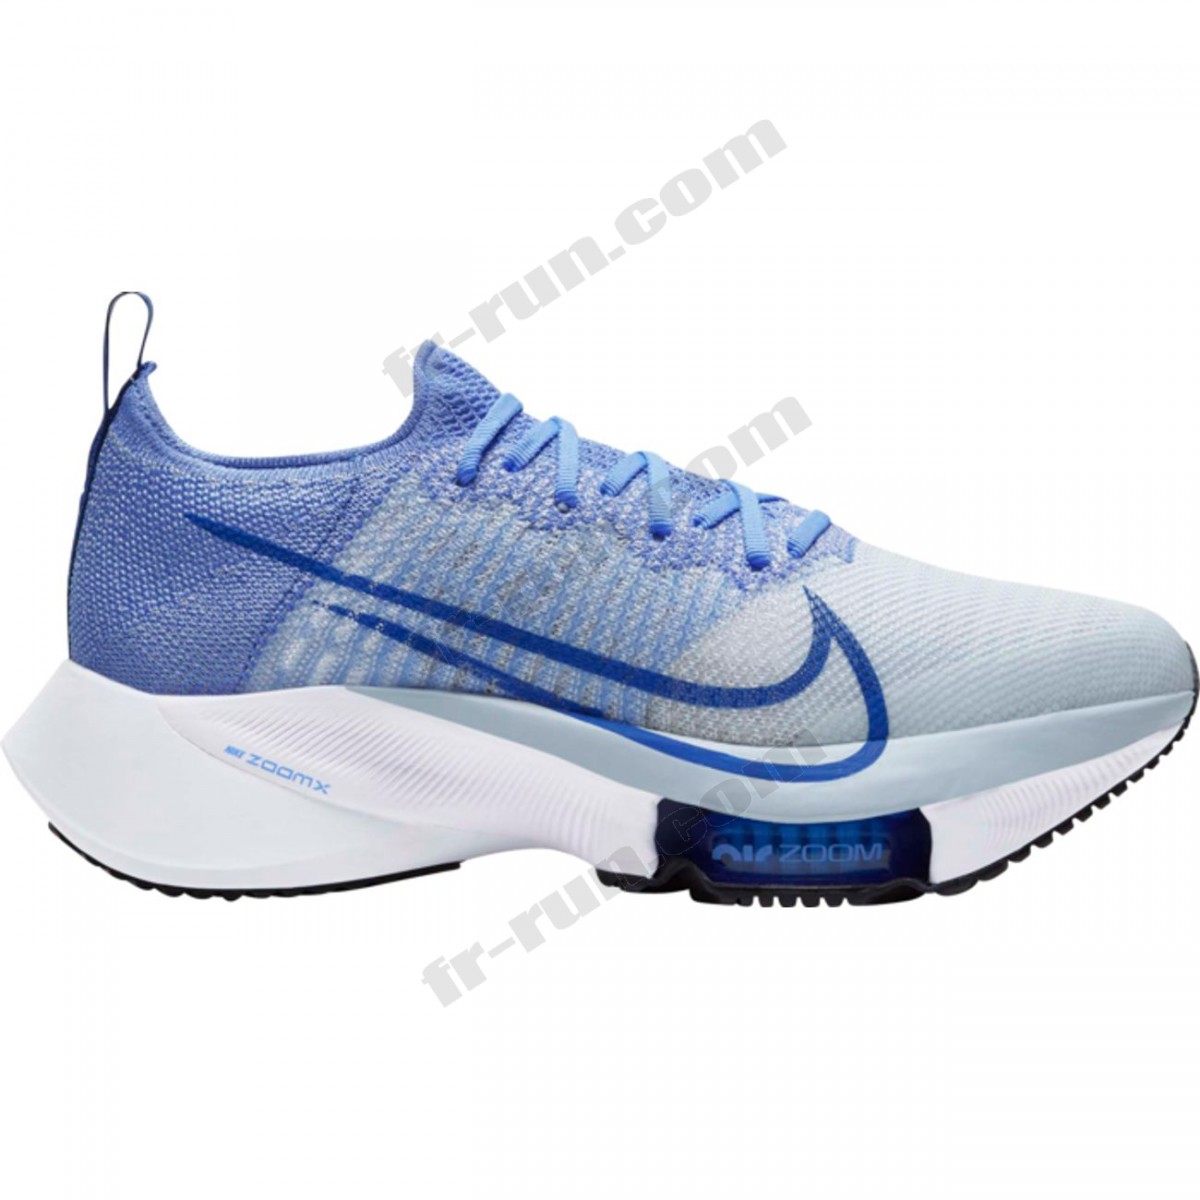 Nike/CHAUSSURES BASSES running femme NIKE W NIKE AIR ZOOM TEMPO NEXT% FK ◇◇◇ Pas Cher Du Tout - Nike/CHAUSSURES BASSES running femme NIKE W NIKE AIR ZOOM TEMPO NEXT% FK ◇◇◇ Pas Cher Du Tout